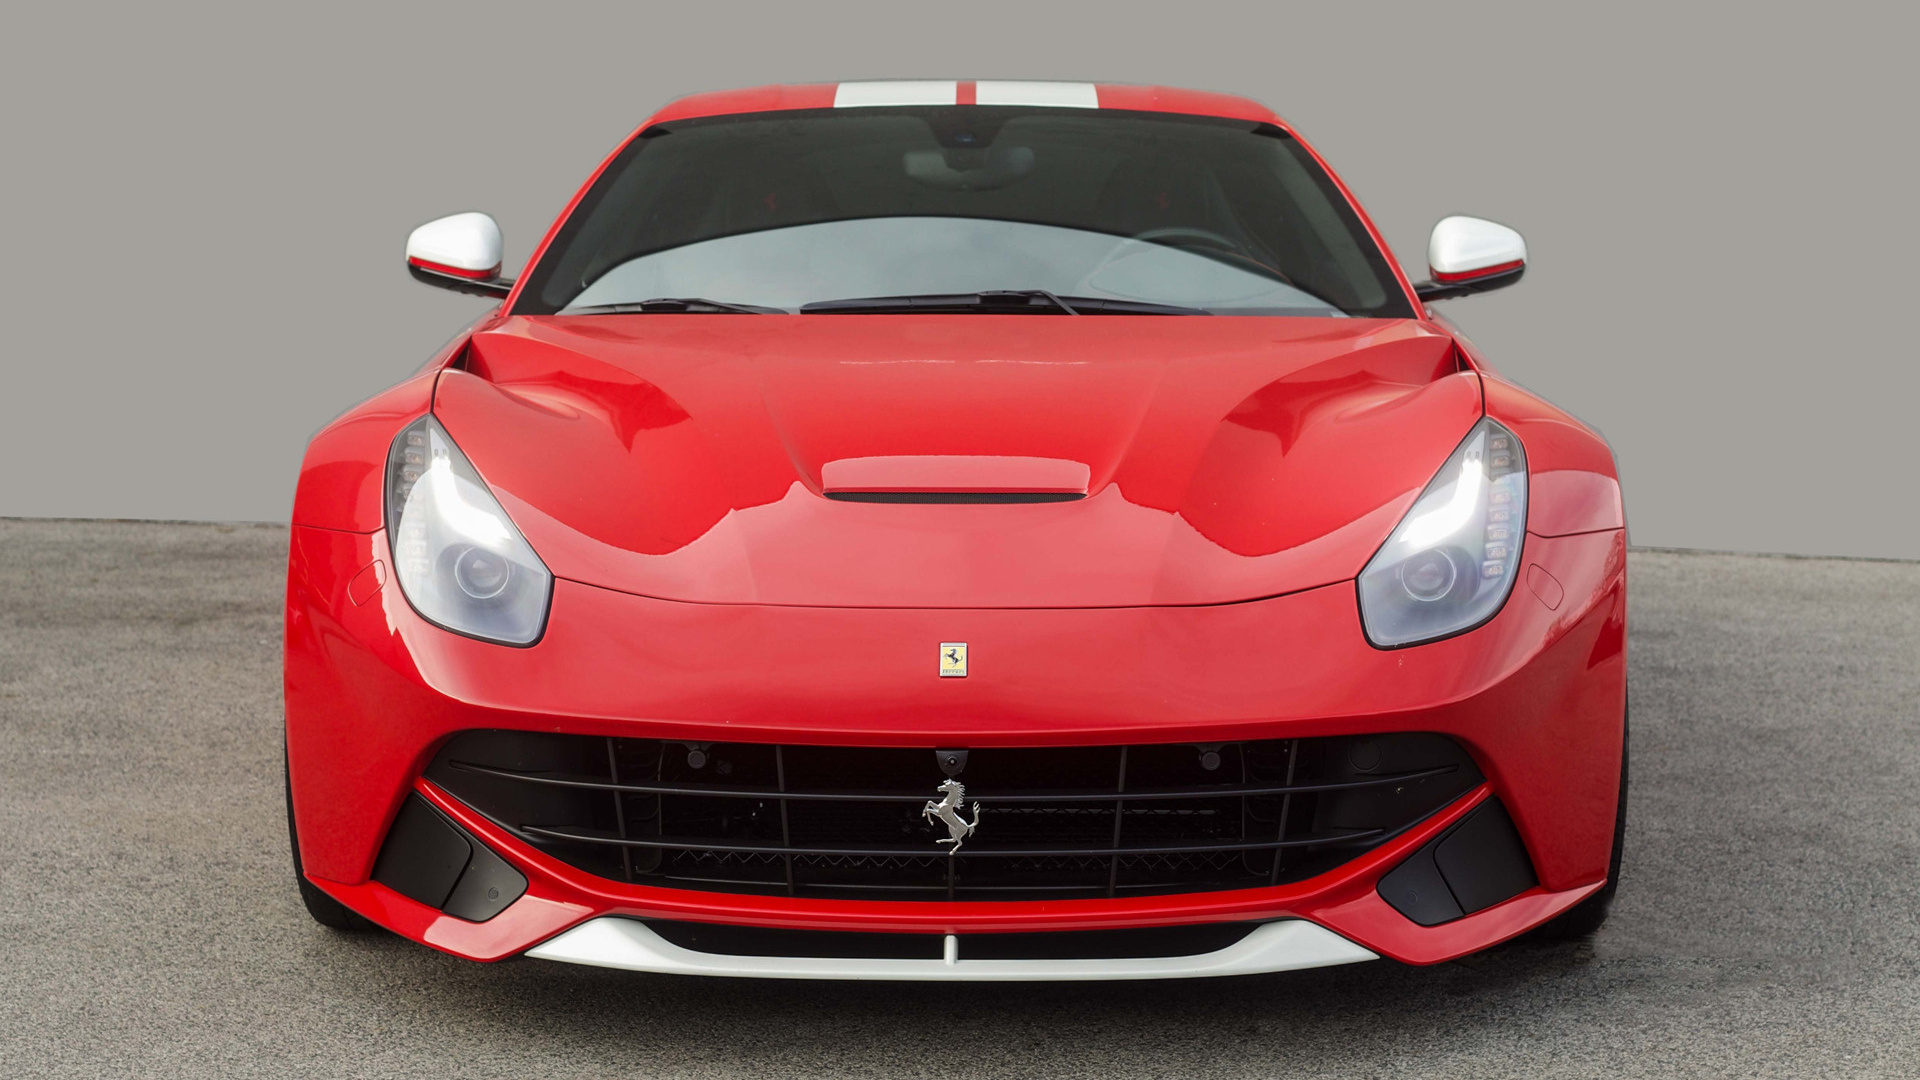 2017 Ferrari F12berlinetta The Red Boxer - Wallpapers and HD Images ...